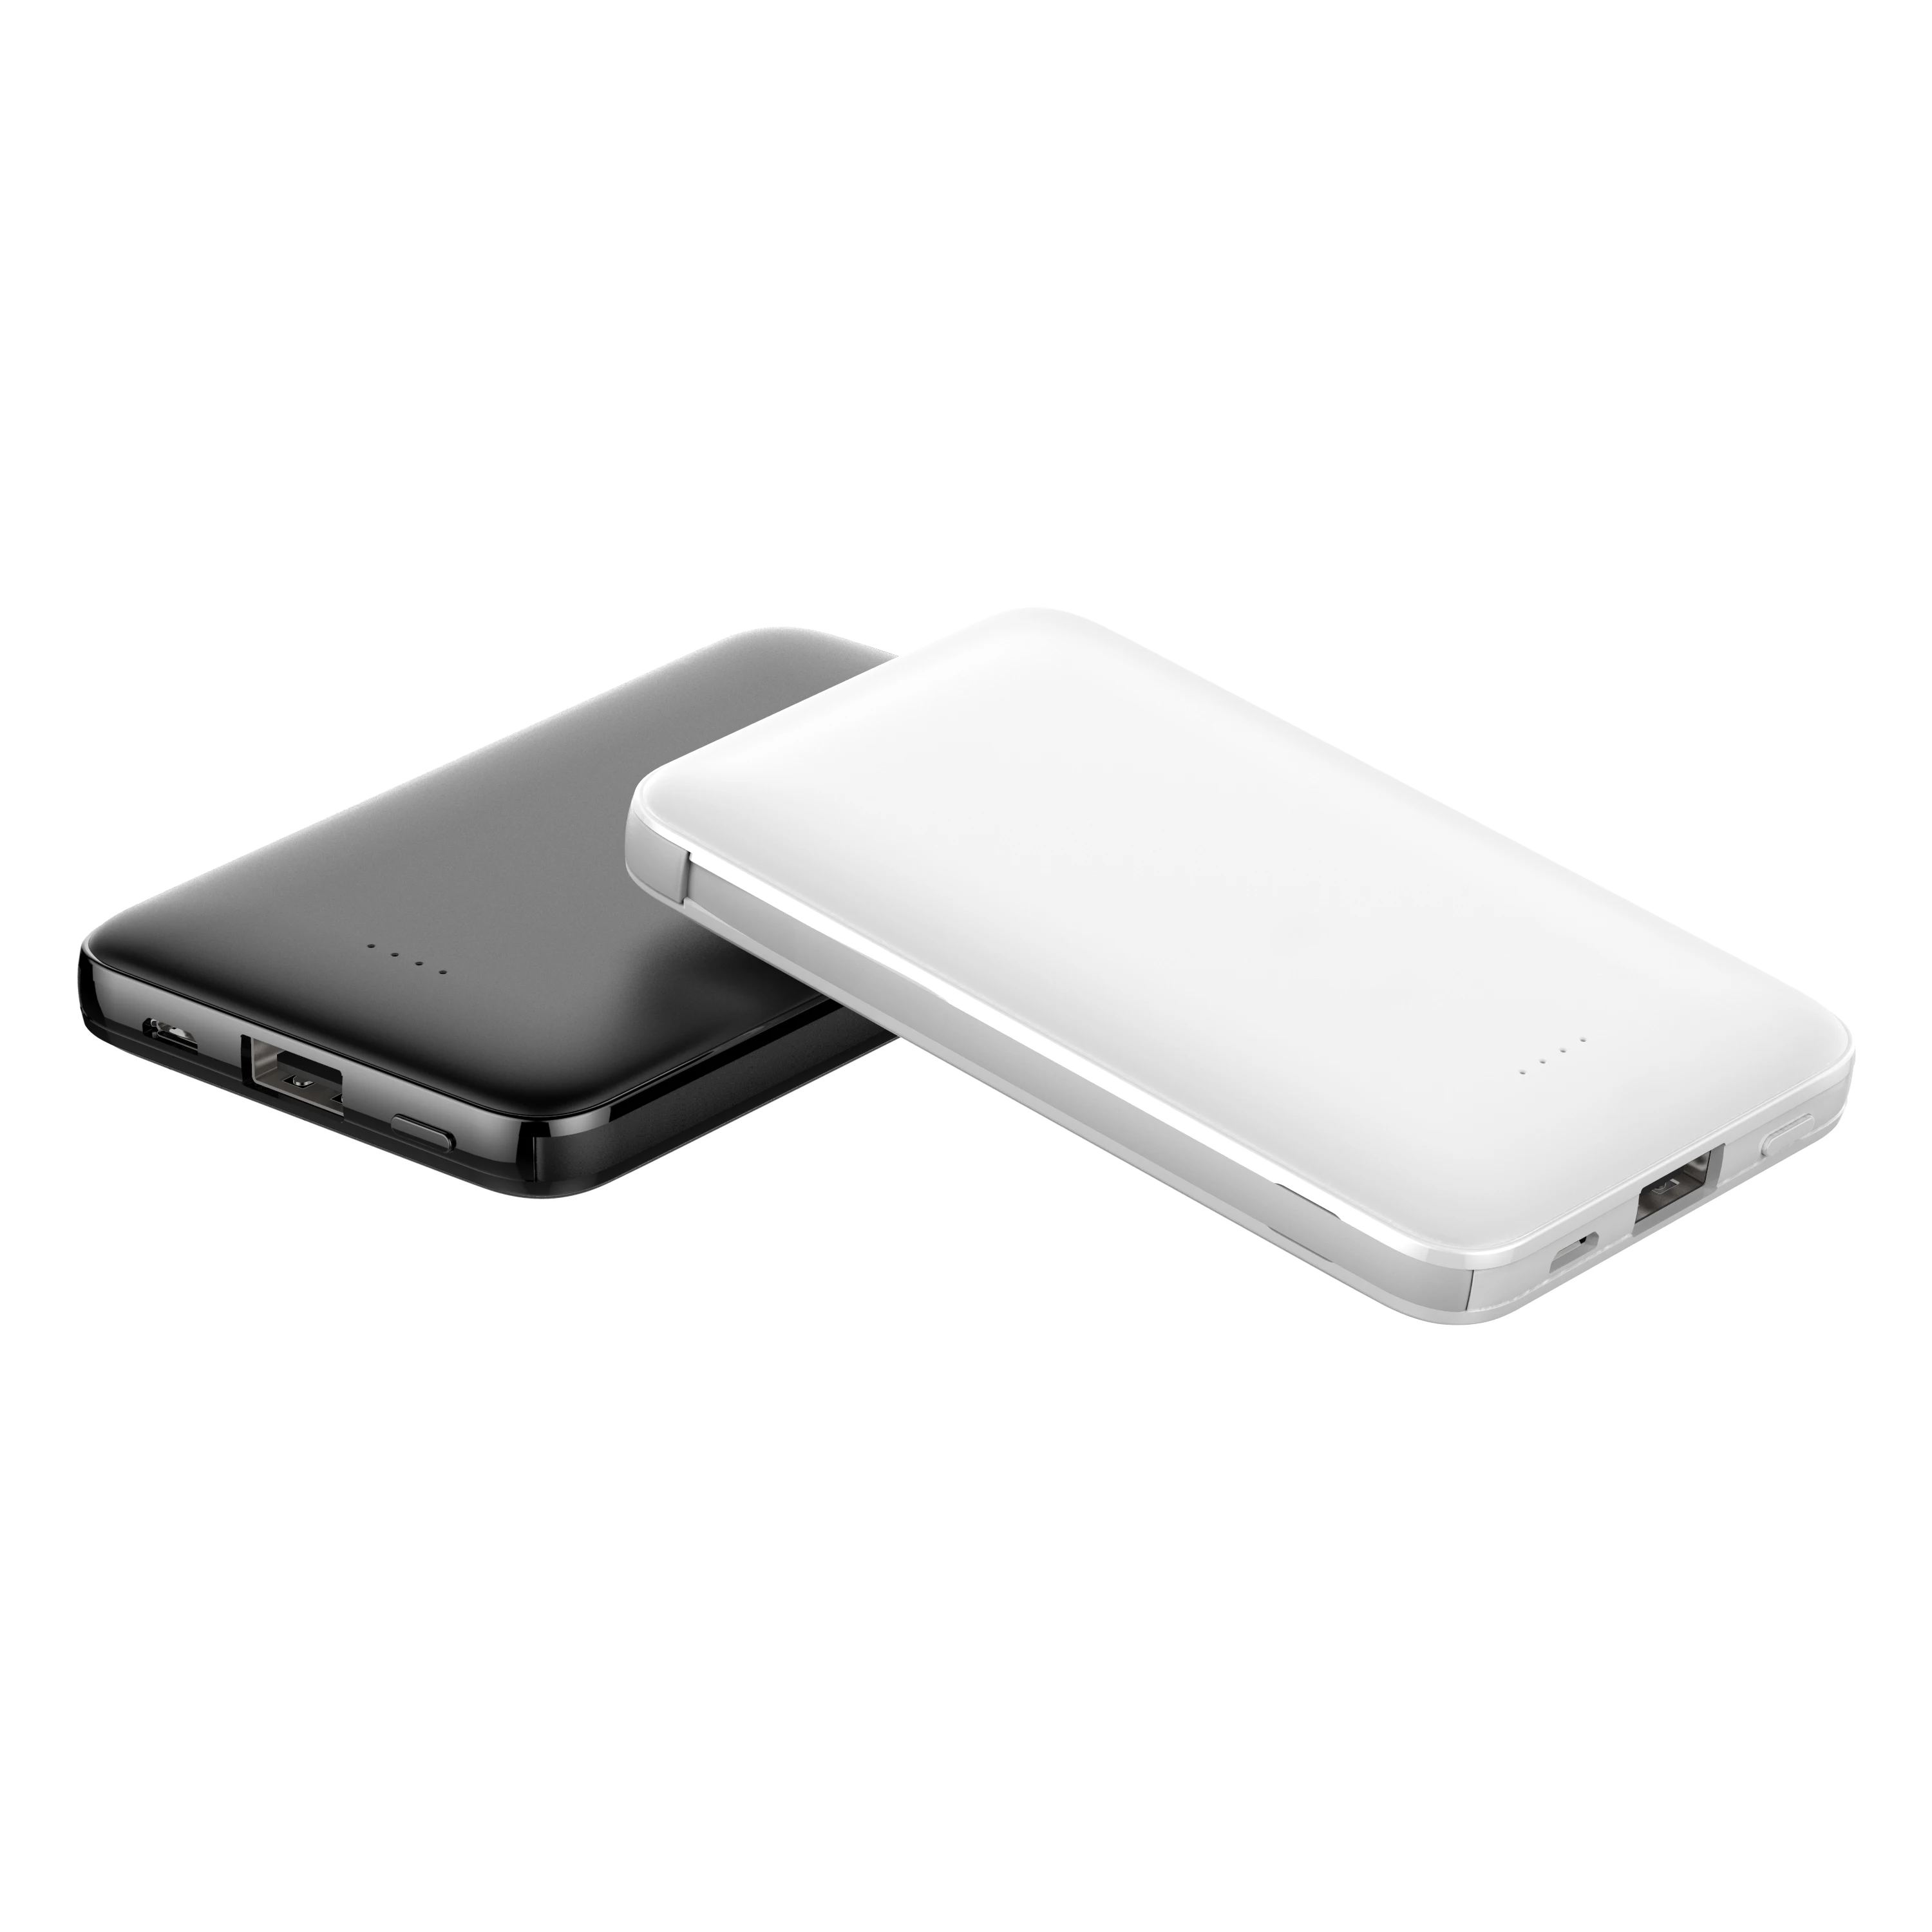 op gang brengen band Soedan 3 In 1 Portable Charger Built In Cable Power Bank 5000mah Powerbank With  Built In Cable And Lightning Adapter - Buy Build In Cable Power Bank,5000mah  Powerbank,Power Bank 5000mah Product on Alibaba.com